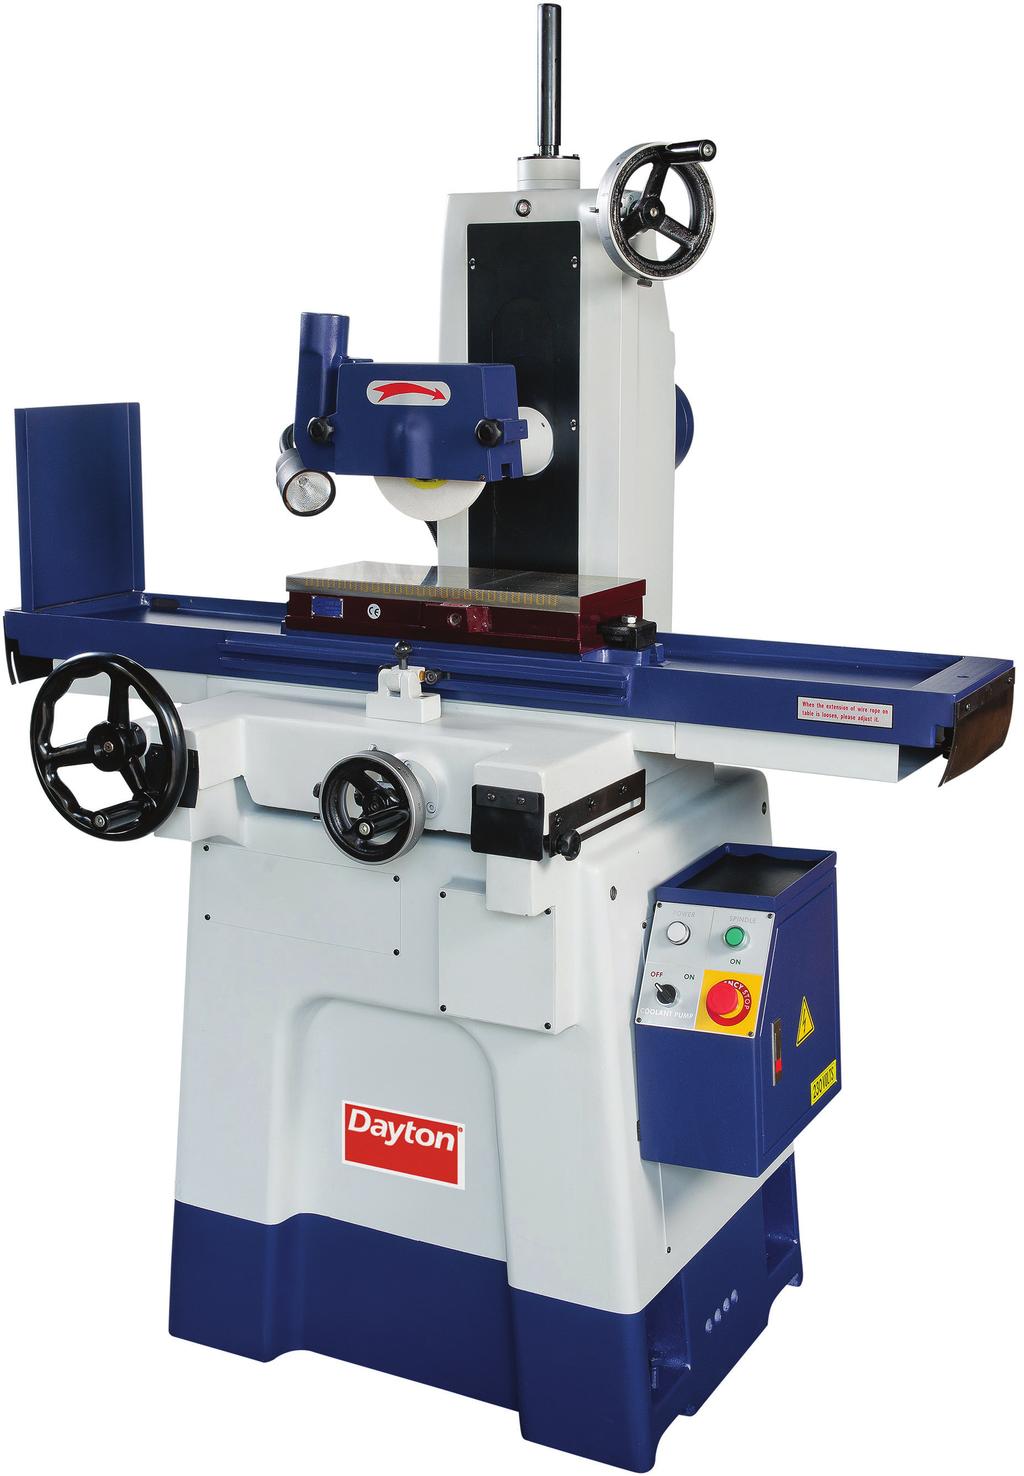 8" X 18" SURFACE GRINDER Dayton's 8 x 18 manual surface grinder is an indispensable metalworking machine for toolrooms as well as production applications to produce high-quality close exacting